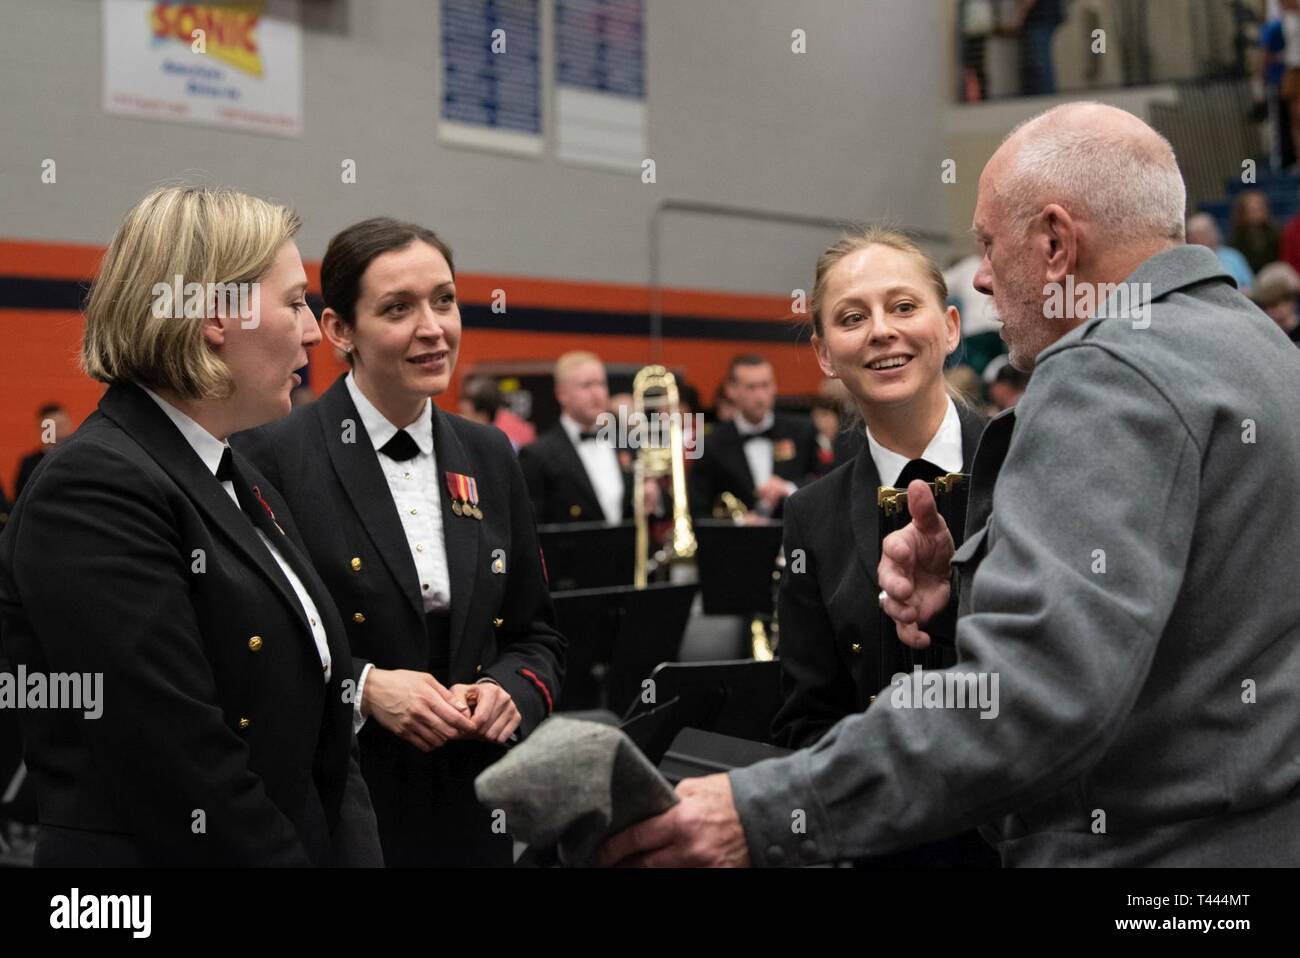 MURFREESBORO, Tenn. (March 16, 2019) Members of the flute section speak with a member of the audience during intermission at the Navy Band concert at Blackman High School in Murfreesboro, Tennessee. The U.S. Navy Band performed in 10 states during its 23-city, 5,000-mile tour, connecting communities across the nation to their Navy. Stock Photo